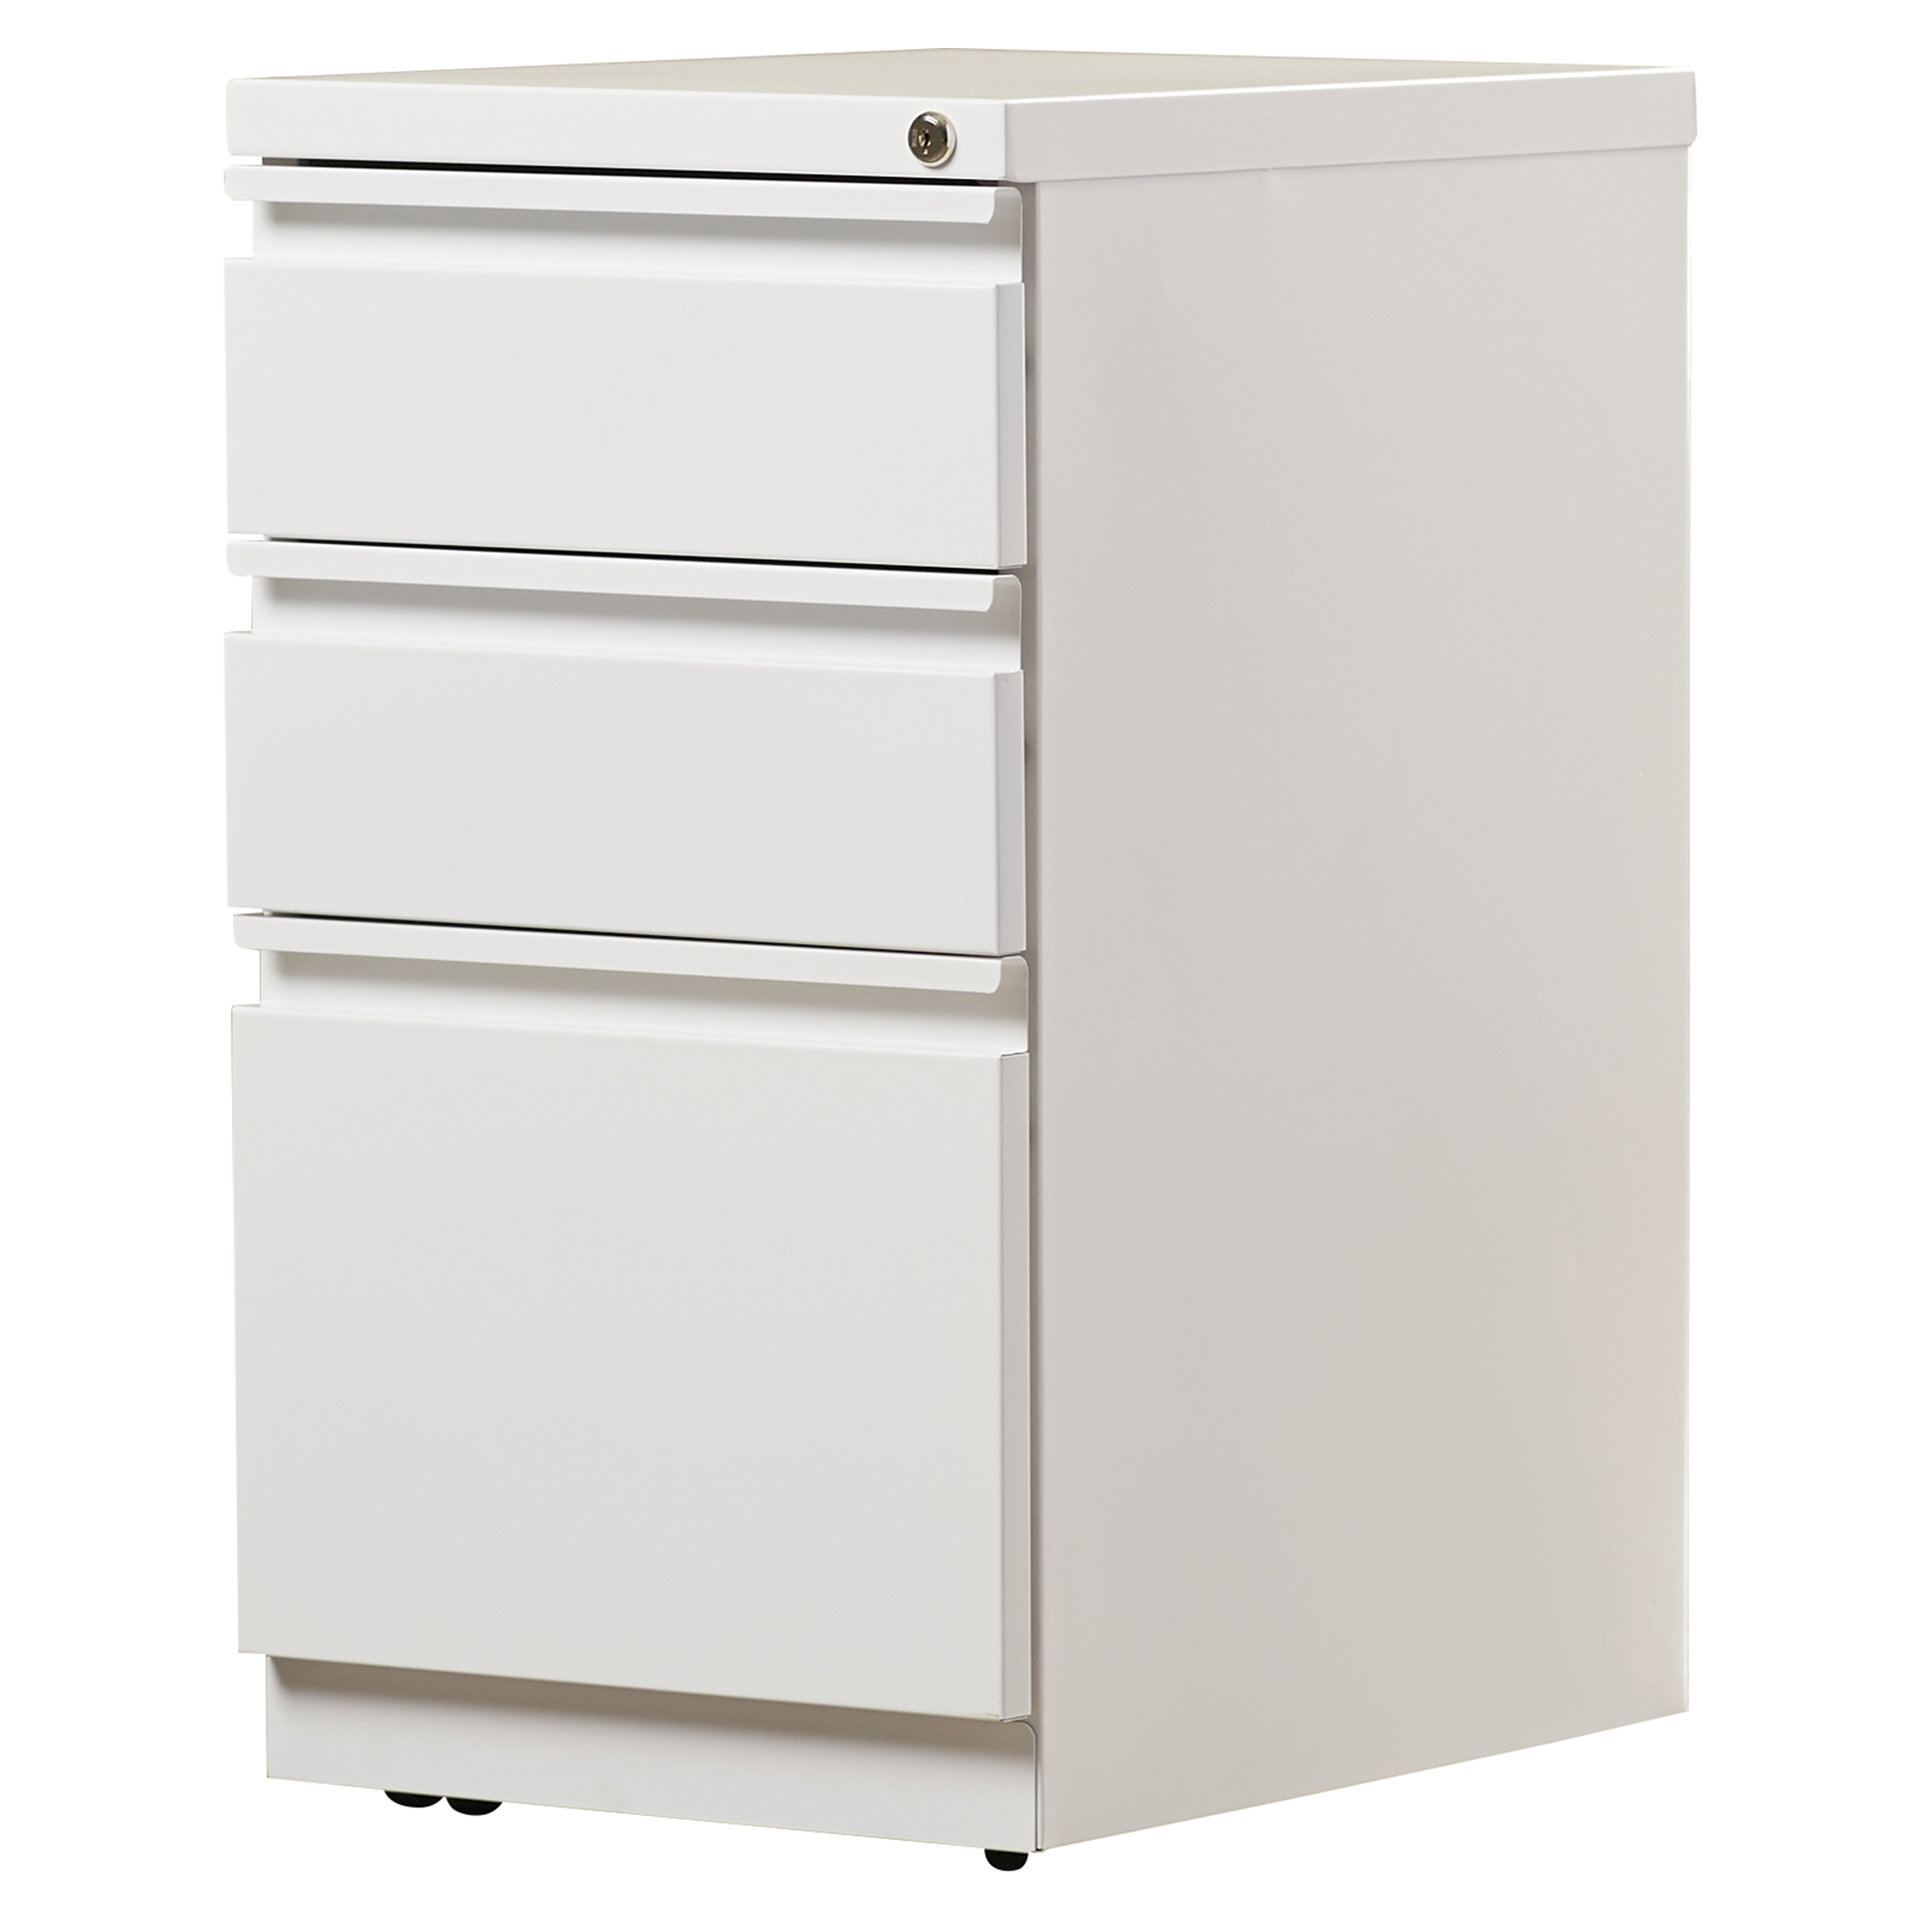 Premo 3 Drawer Vertical Filing Cabinet Reviews Allmodern in sizing 1920 X 1920